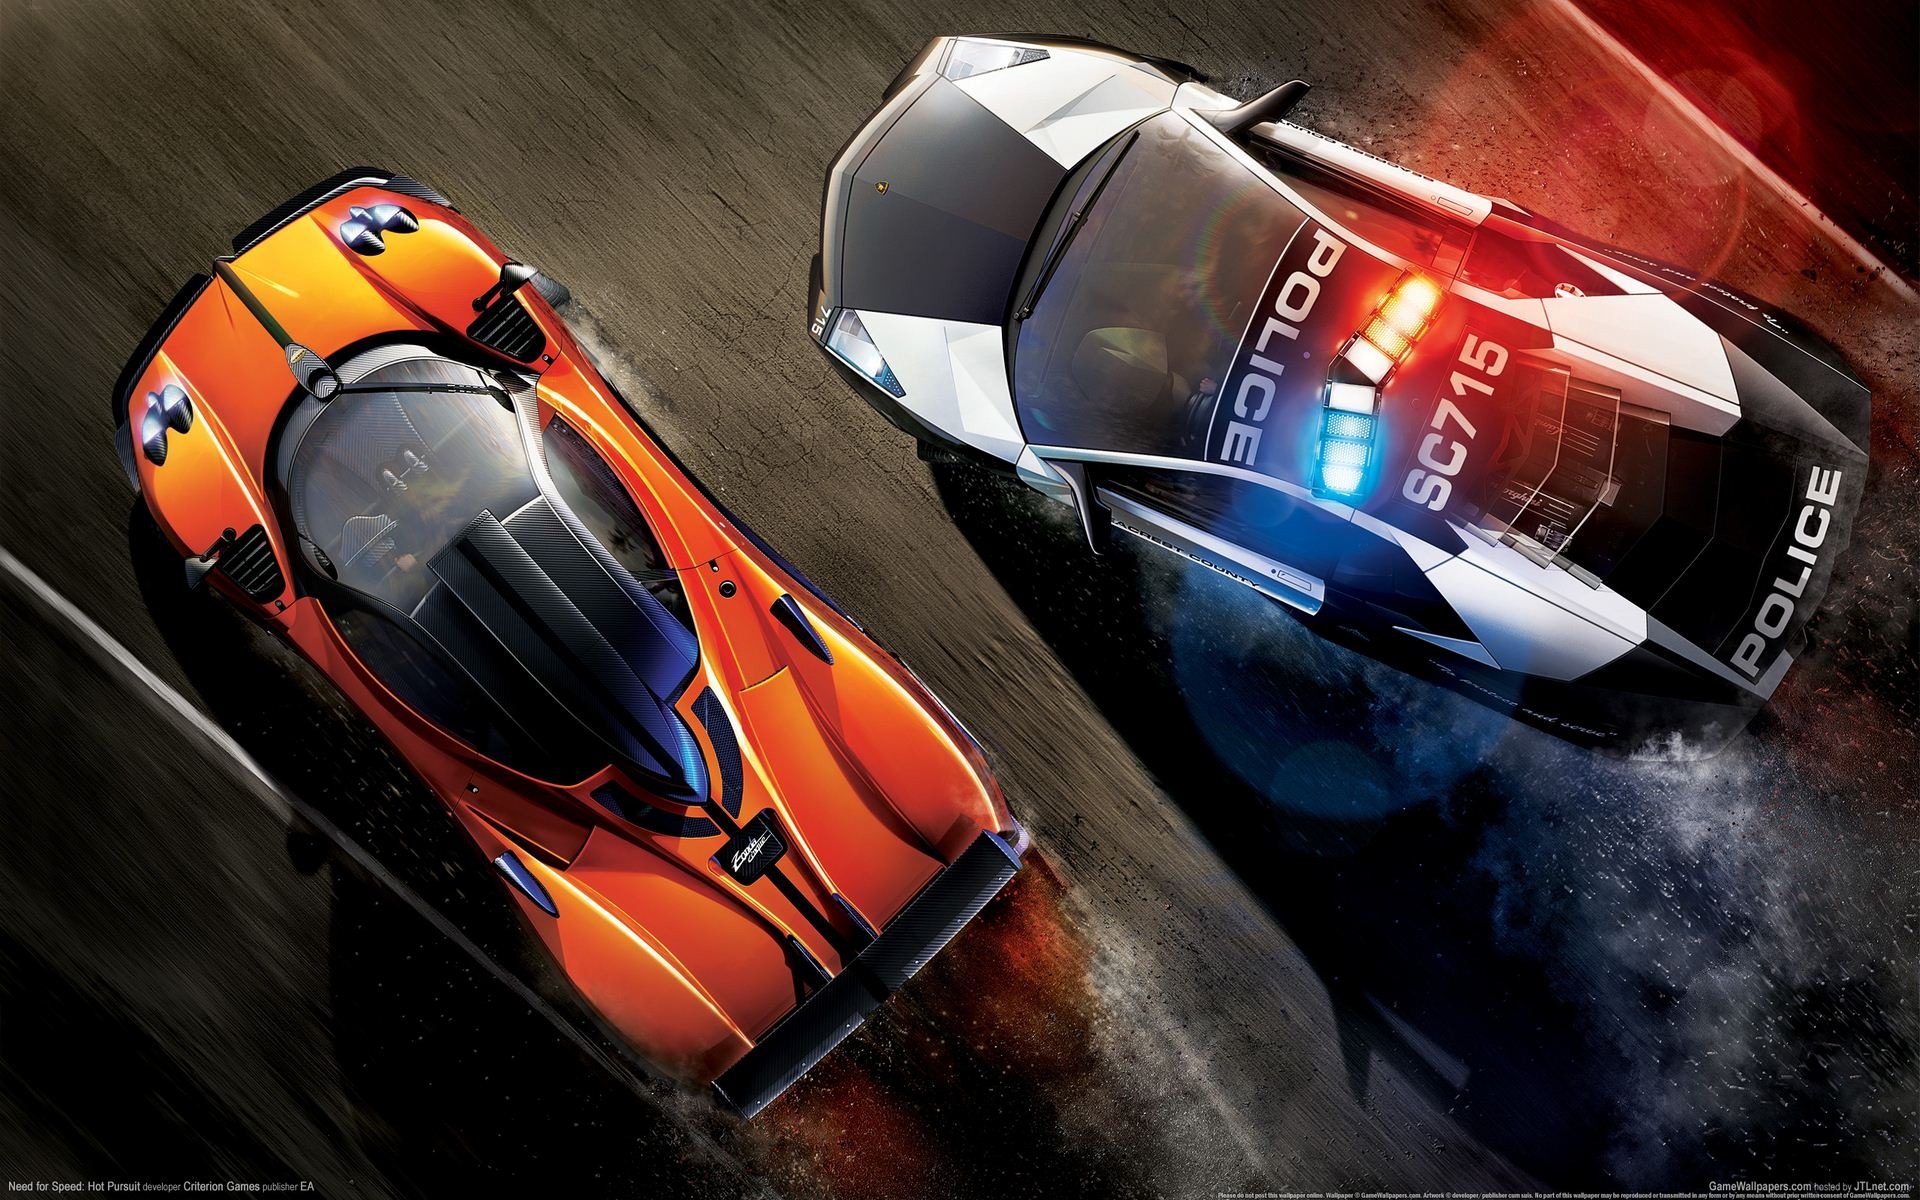 Need for Speed: Hot Pursuit 極品飛車14：熱力追踪 #1 - 1920x1200